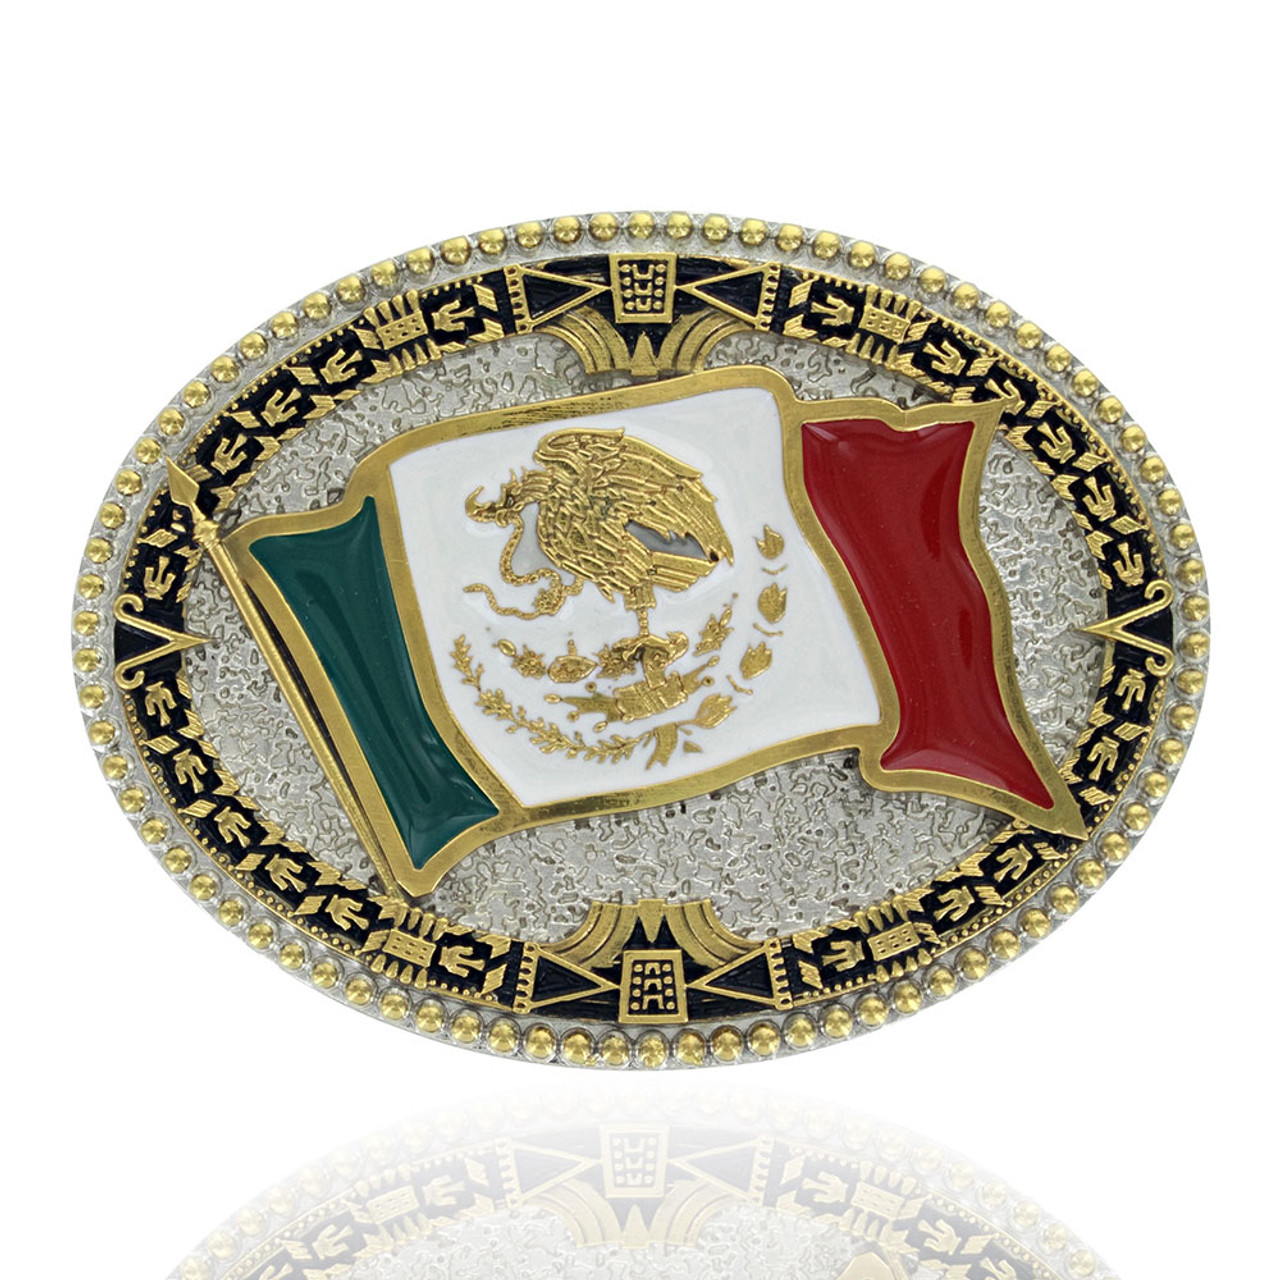 Mexico Belt & Buckle, Mexican Belts, Gold Coat of Arms Buckle, Cinturon Mexicano, Mexican Coat of Arms, Mexico Buckle, Escudo Mexicano